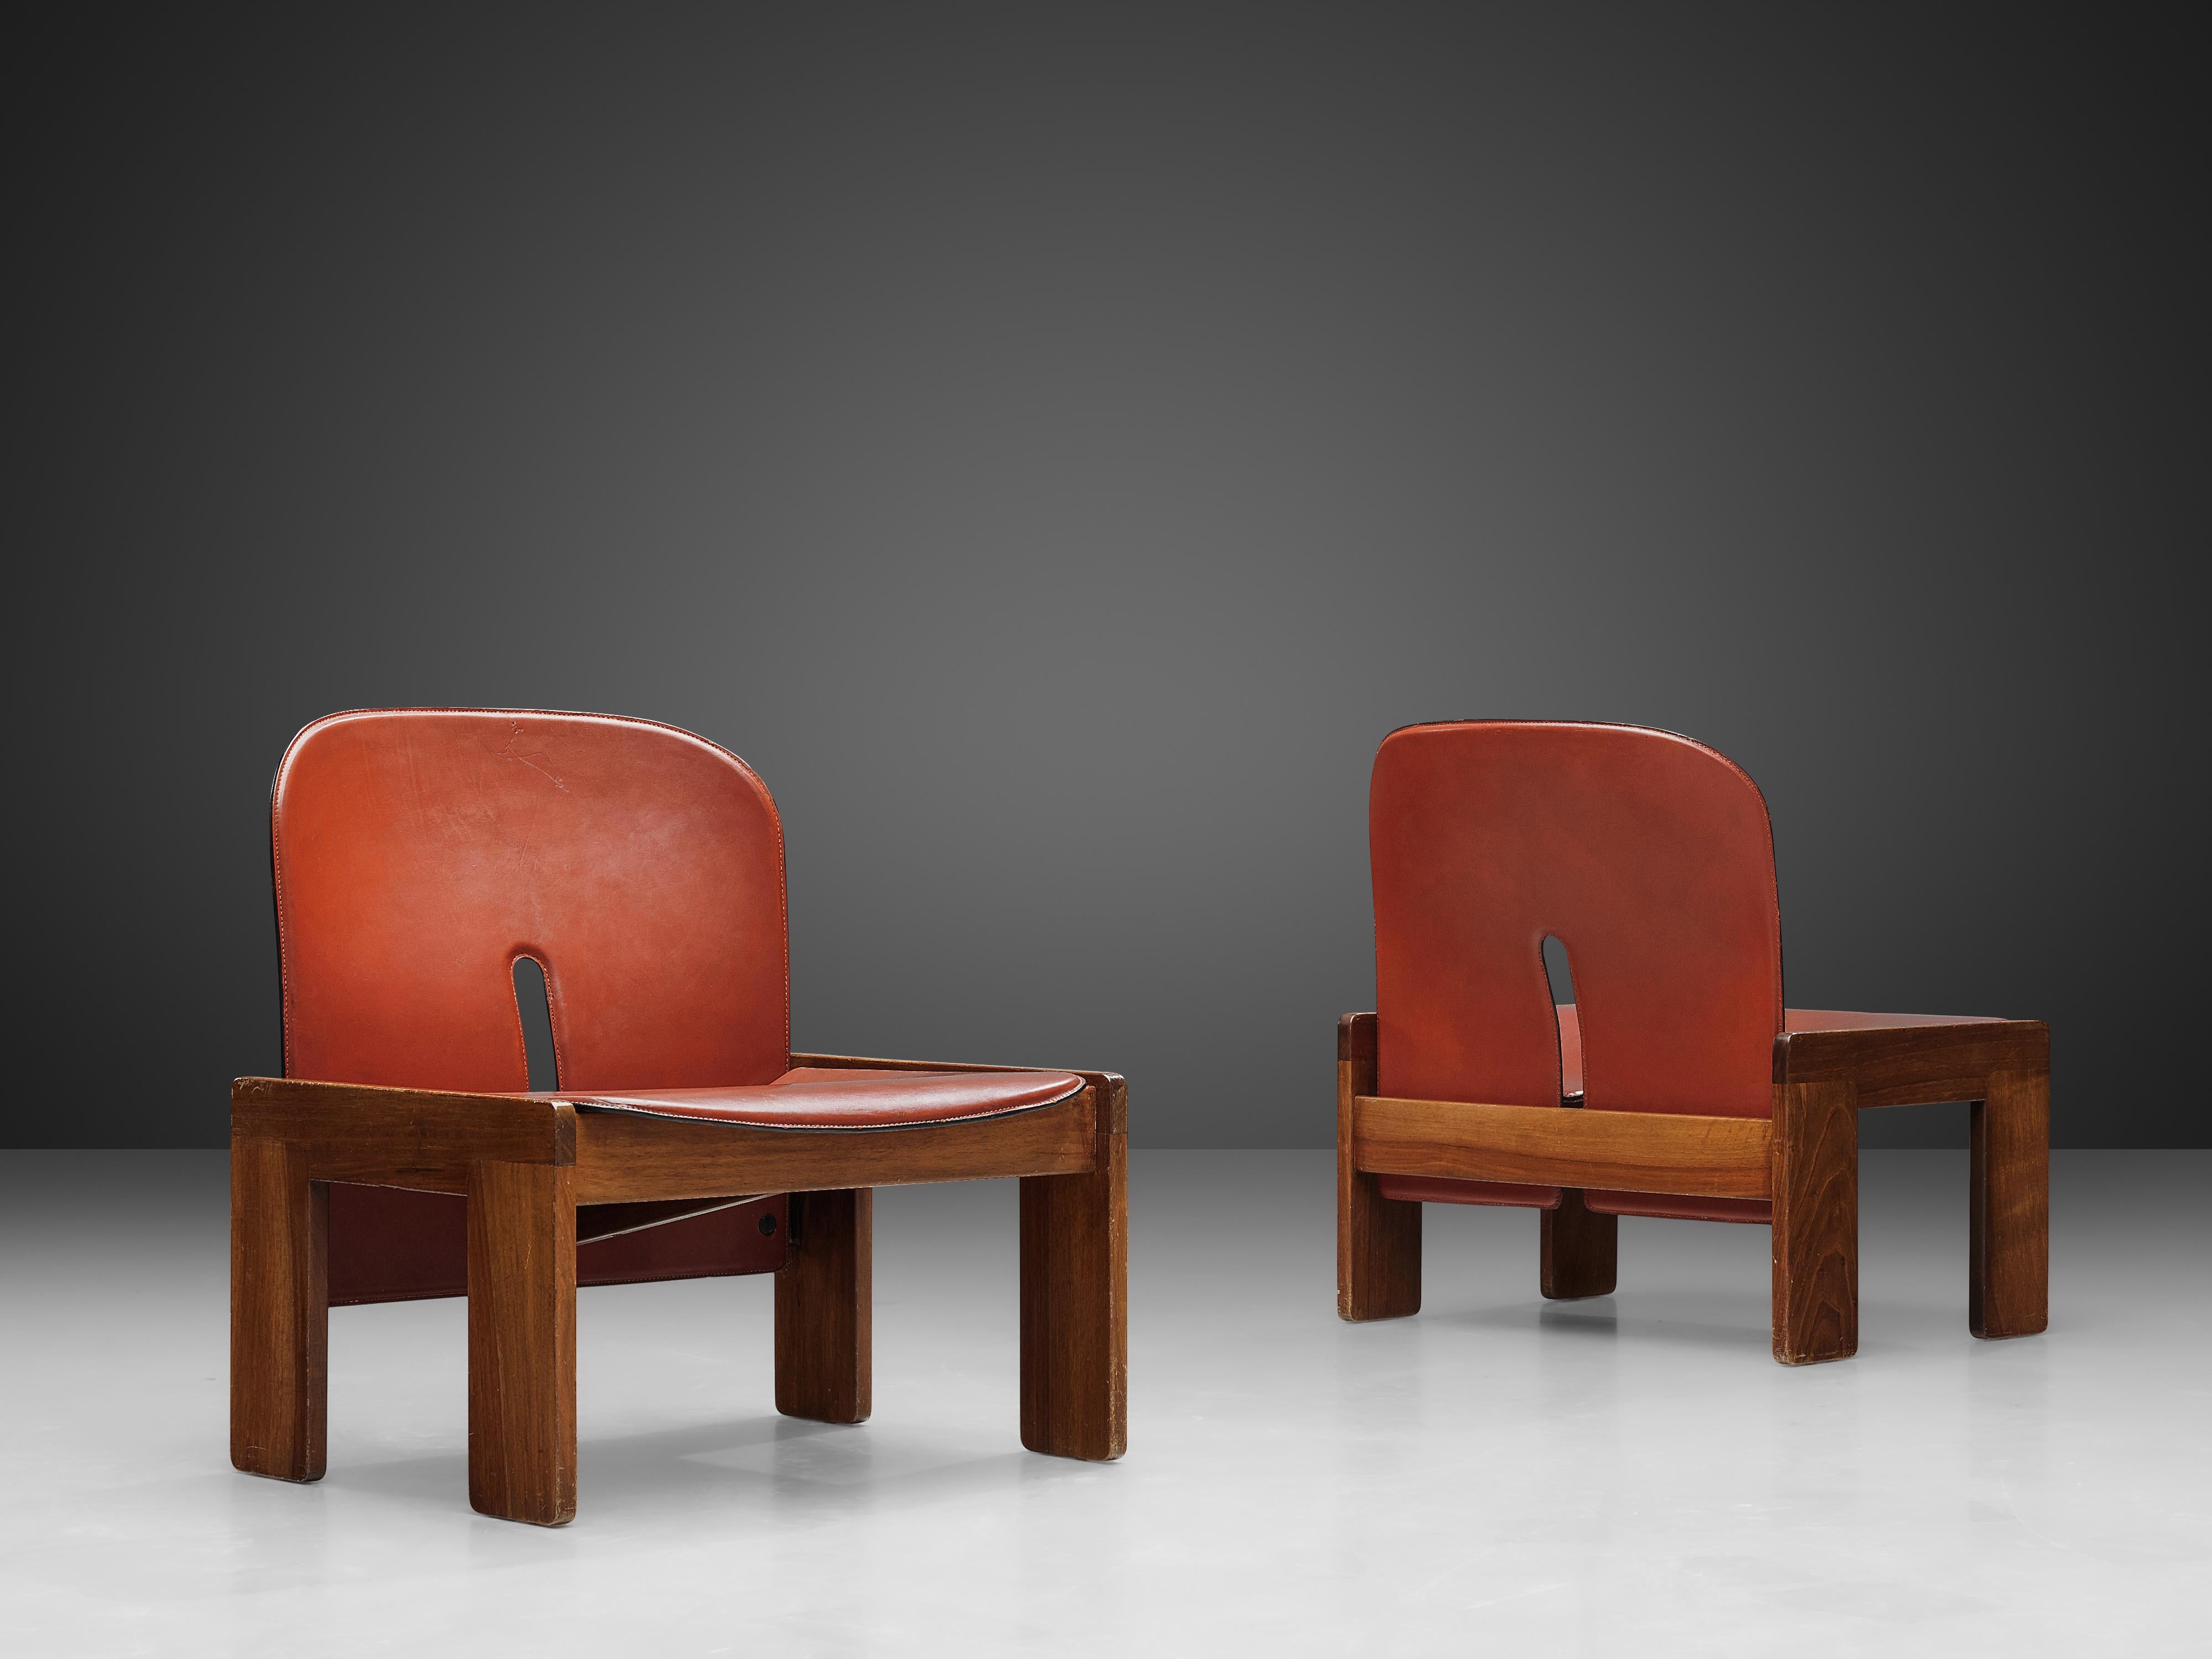 Afra & Tobia Scarpa for Cassina, pair of '925' easy chairs, walnut and leather, Italy, 1966

Two '925' lounge chairs by Italian designer couple Tobia and Afra Scarpa. These low chairs have a cubic and architectural appearance. The base consist of